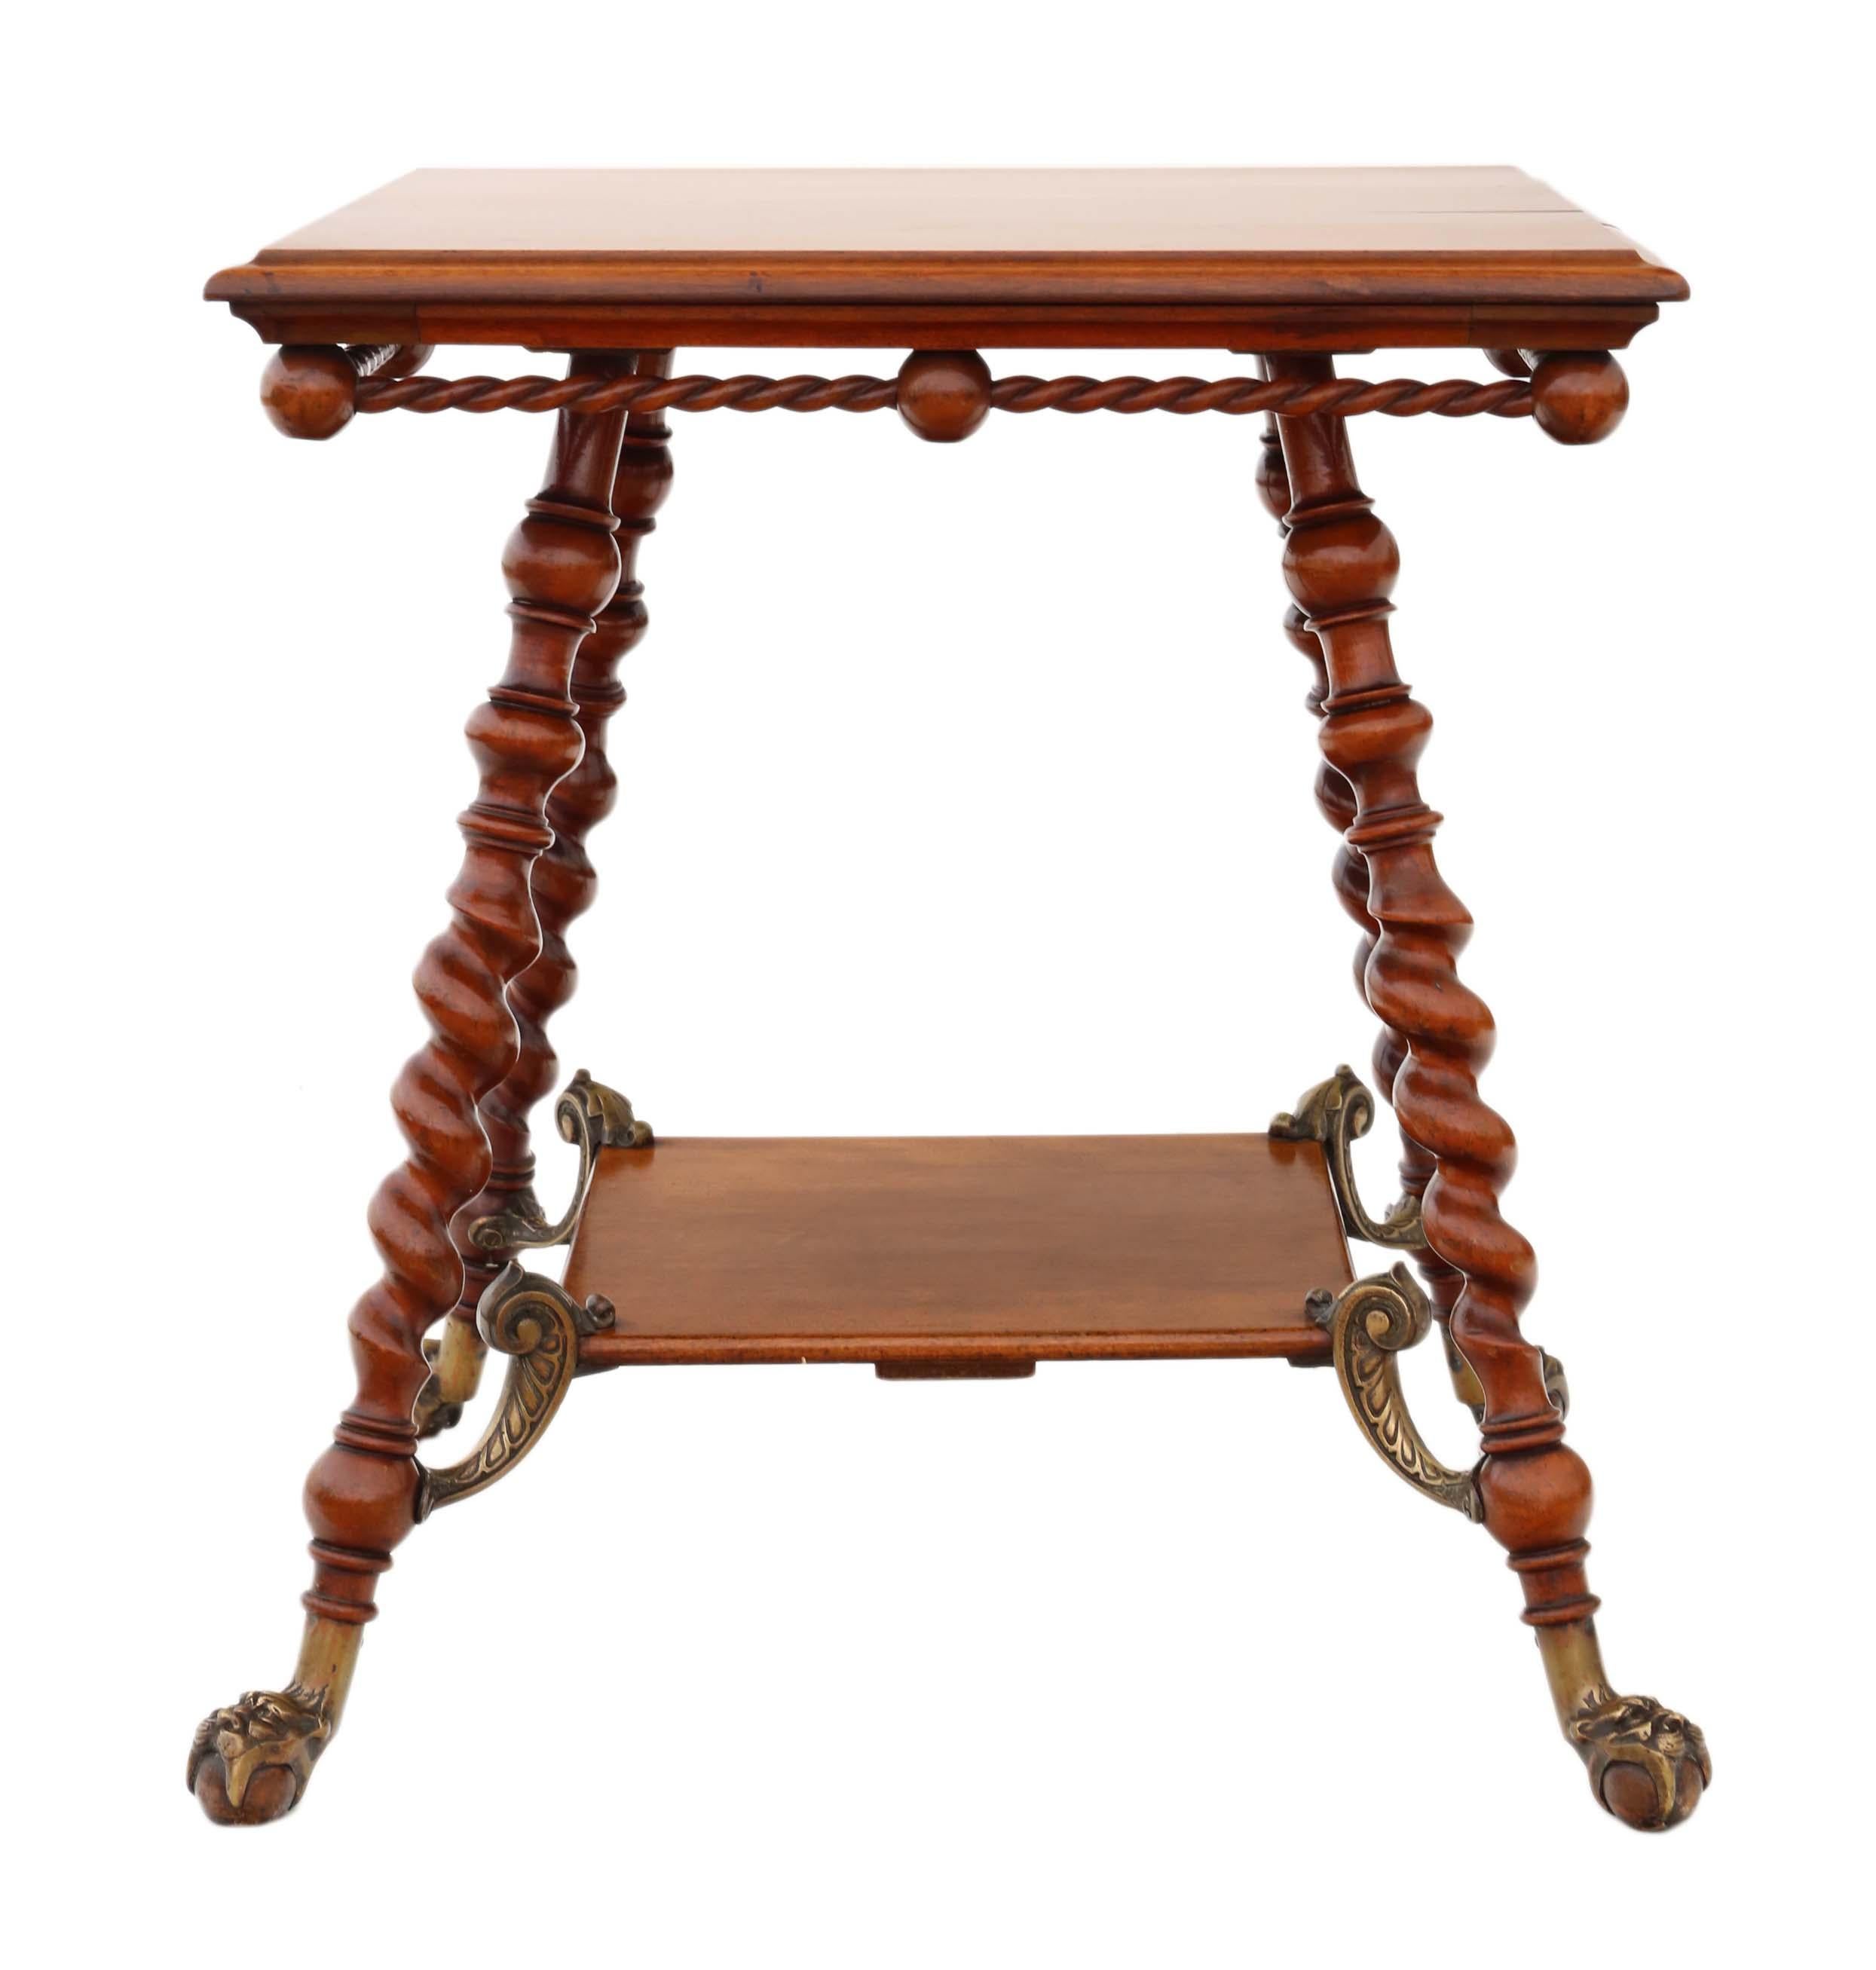 Antique rare fine quality Victorian, circa 1880-1900 red walnut and brass centre table.
Solid, heavy and strong with no loose joints. Stands on attractive twist legs with wooden ball and brass lion feet.
Would look great in the right location! No